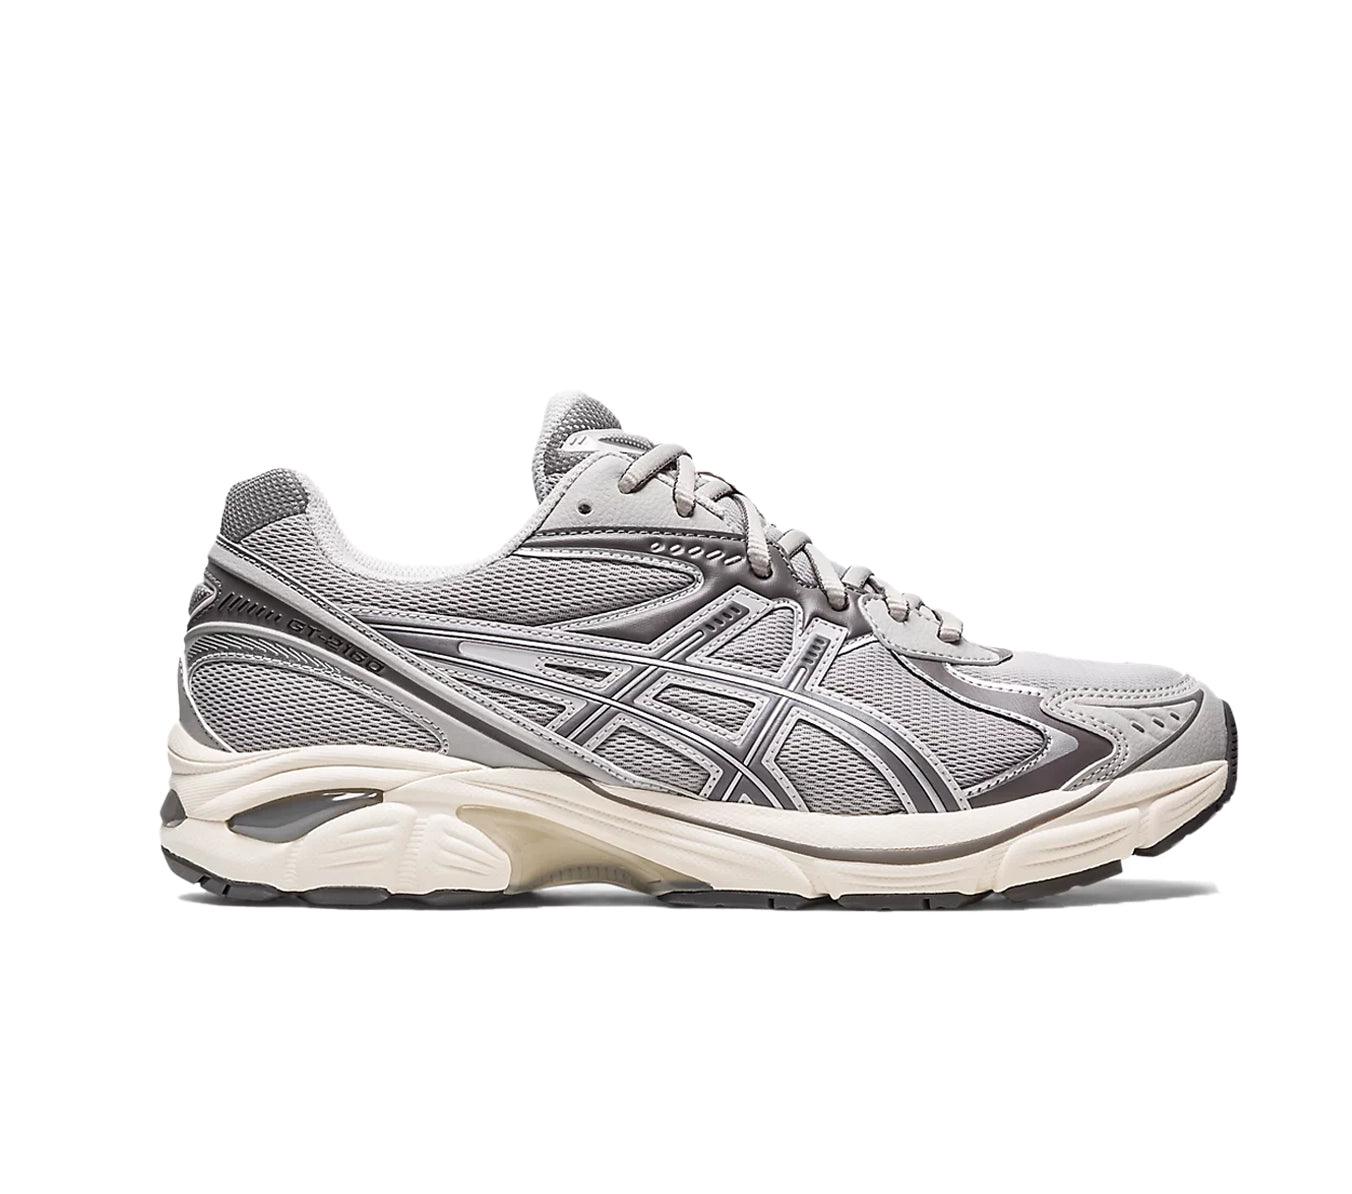 Asics GT-2160 - Oyster Grey/Carbon - Shoes